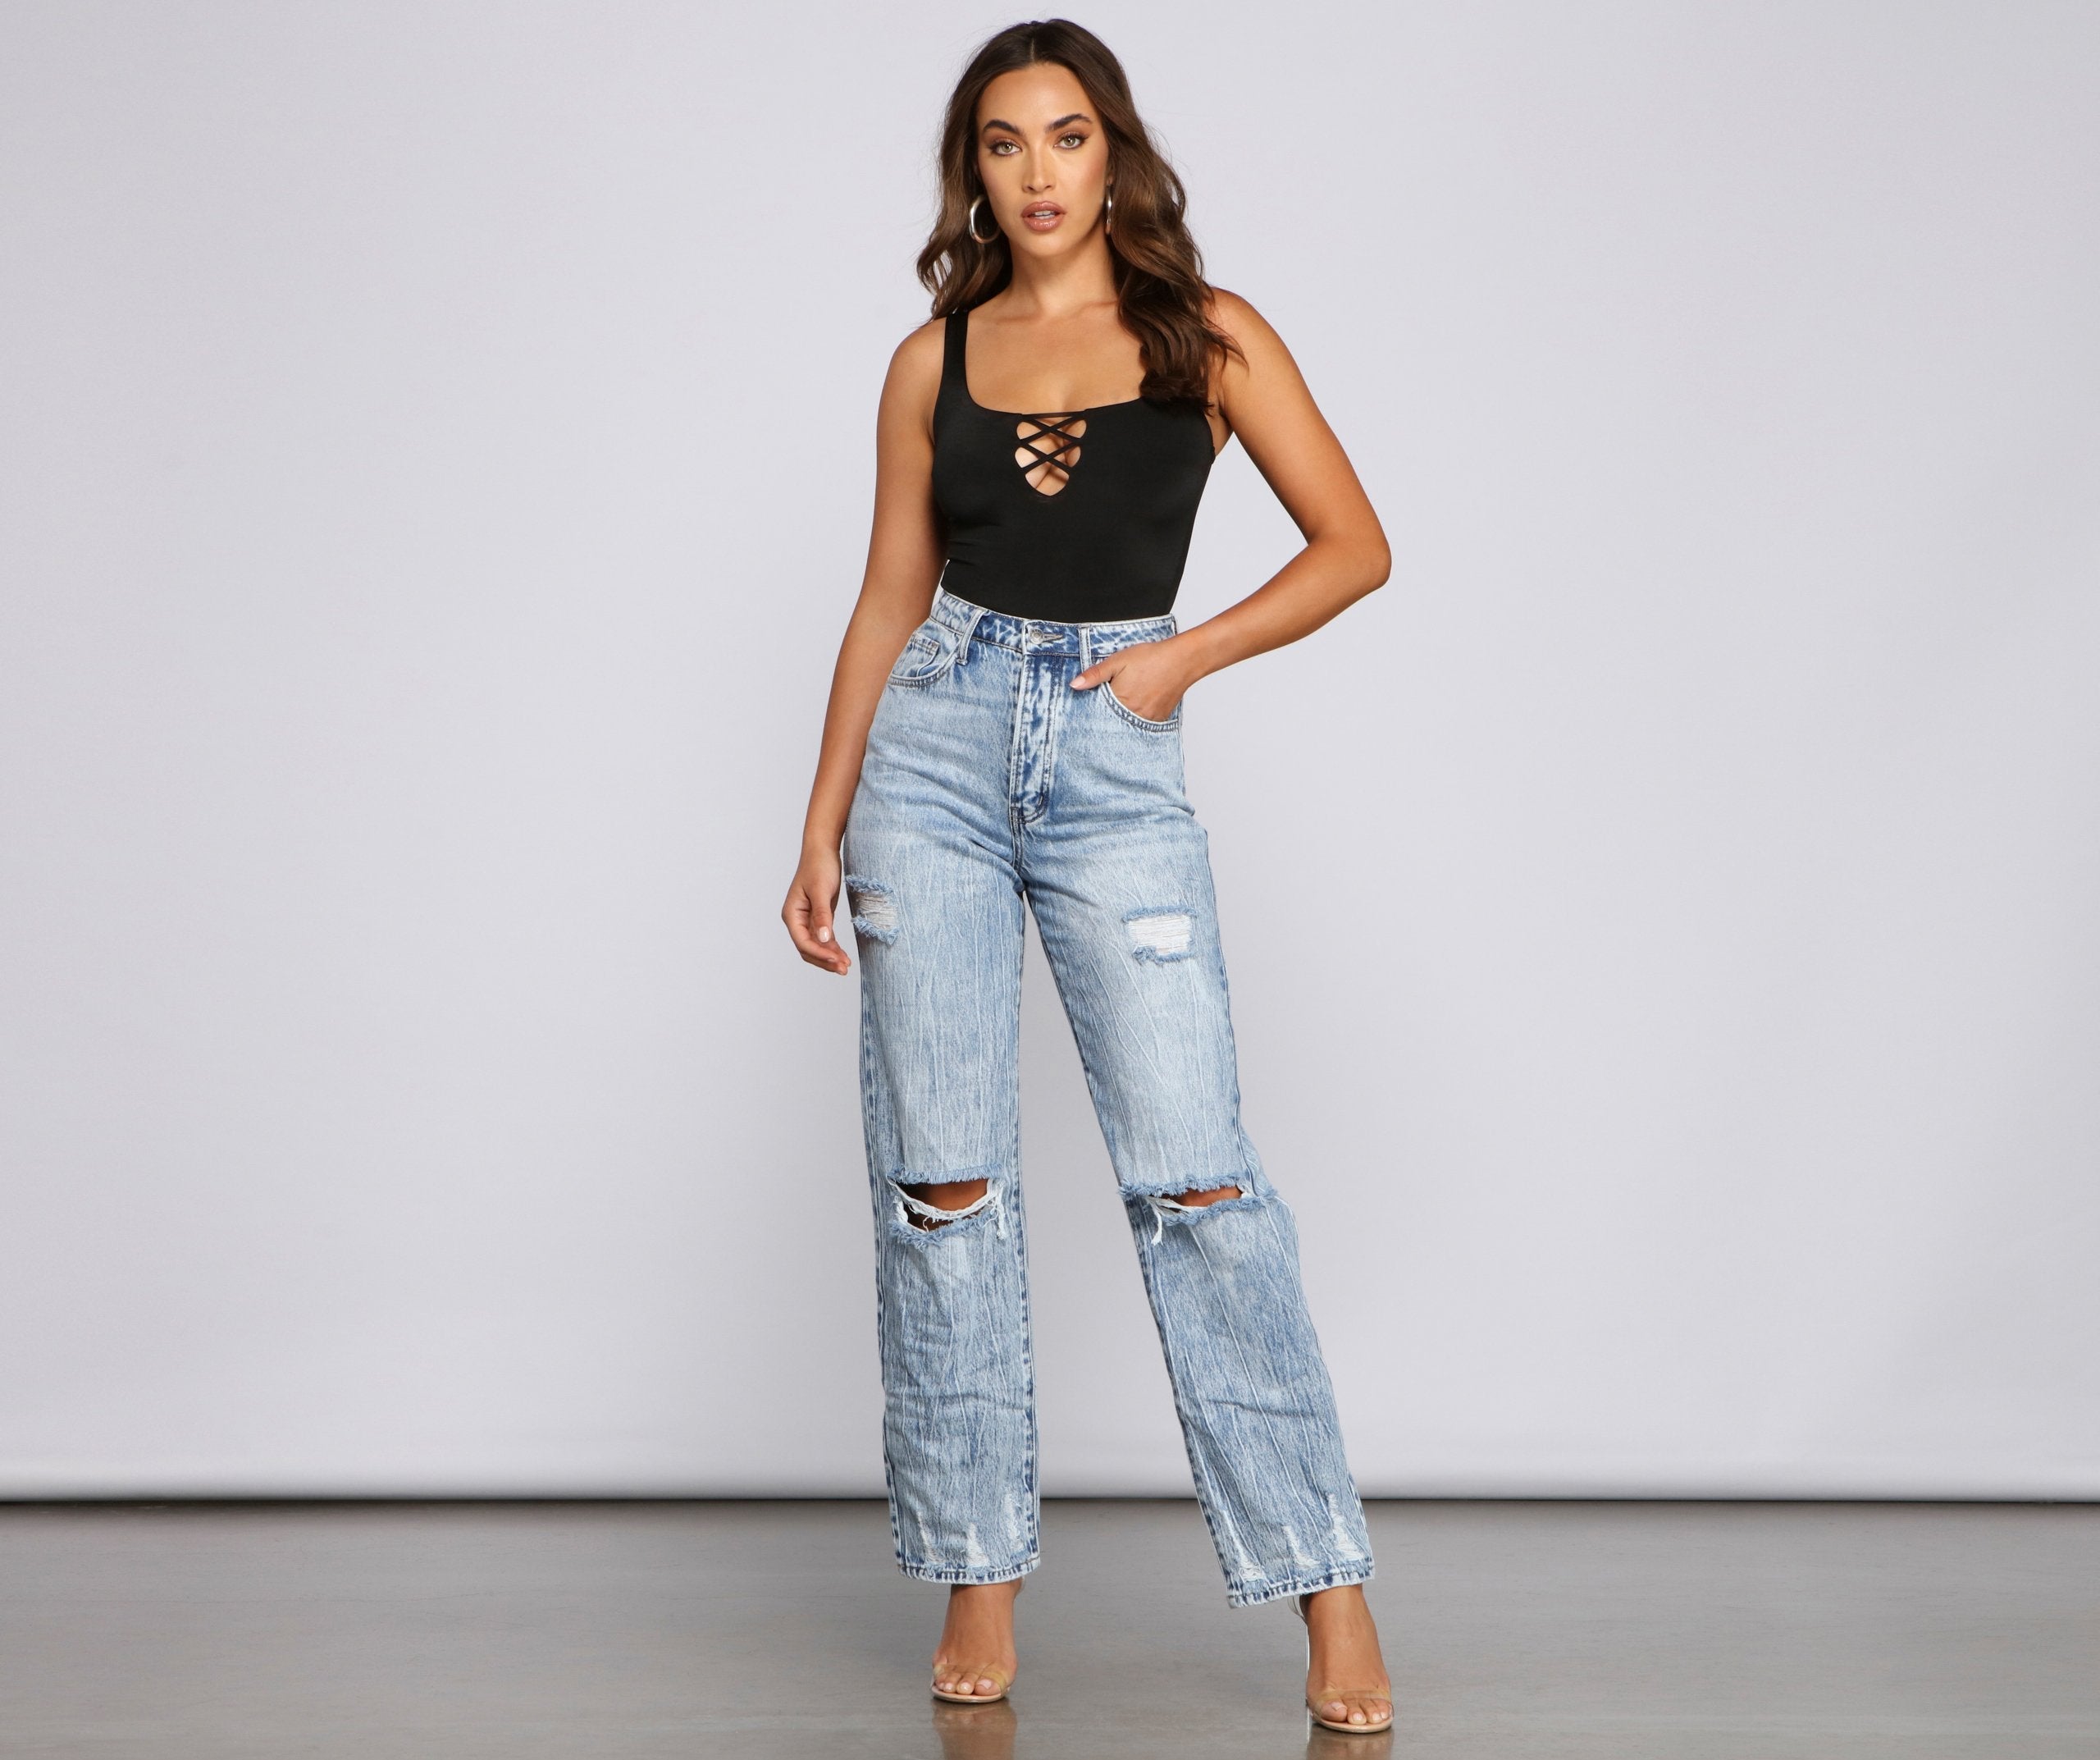 Keep It On-Trend Strappy Bodysuit - Lady Occasions